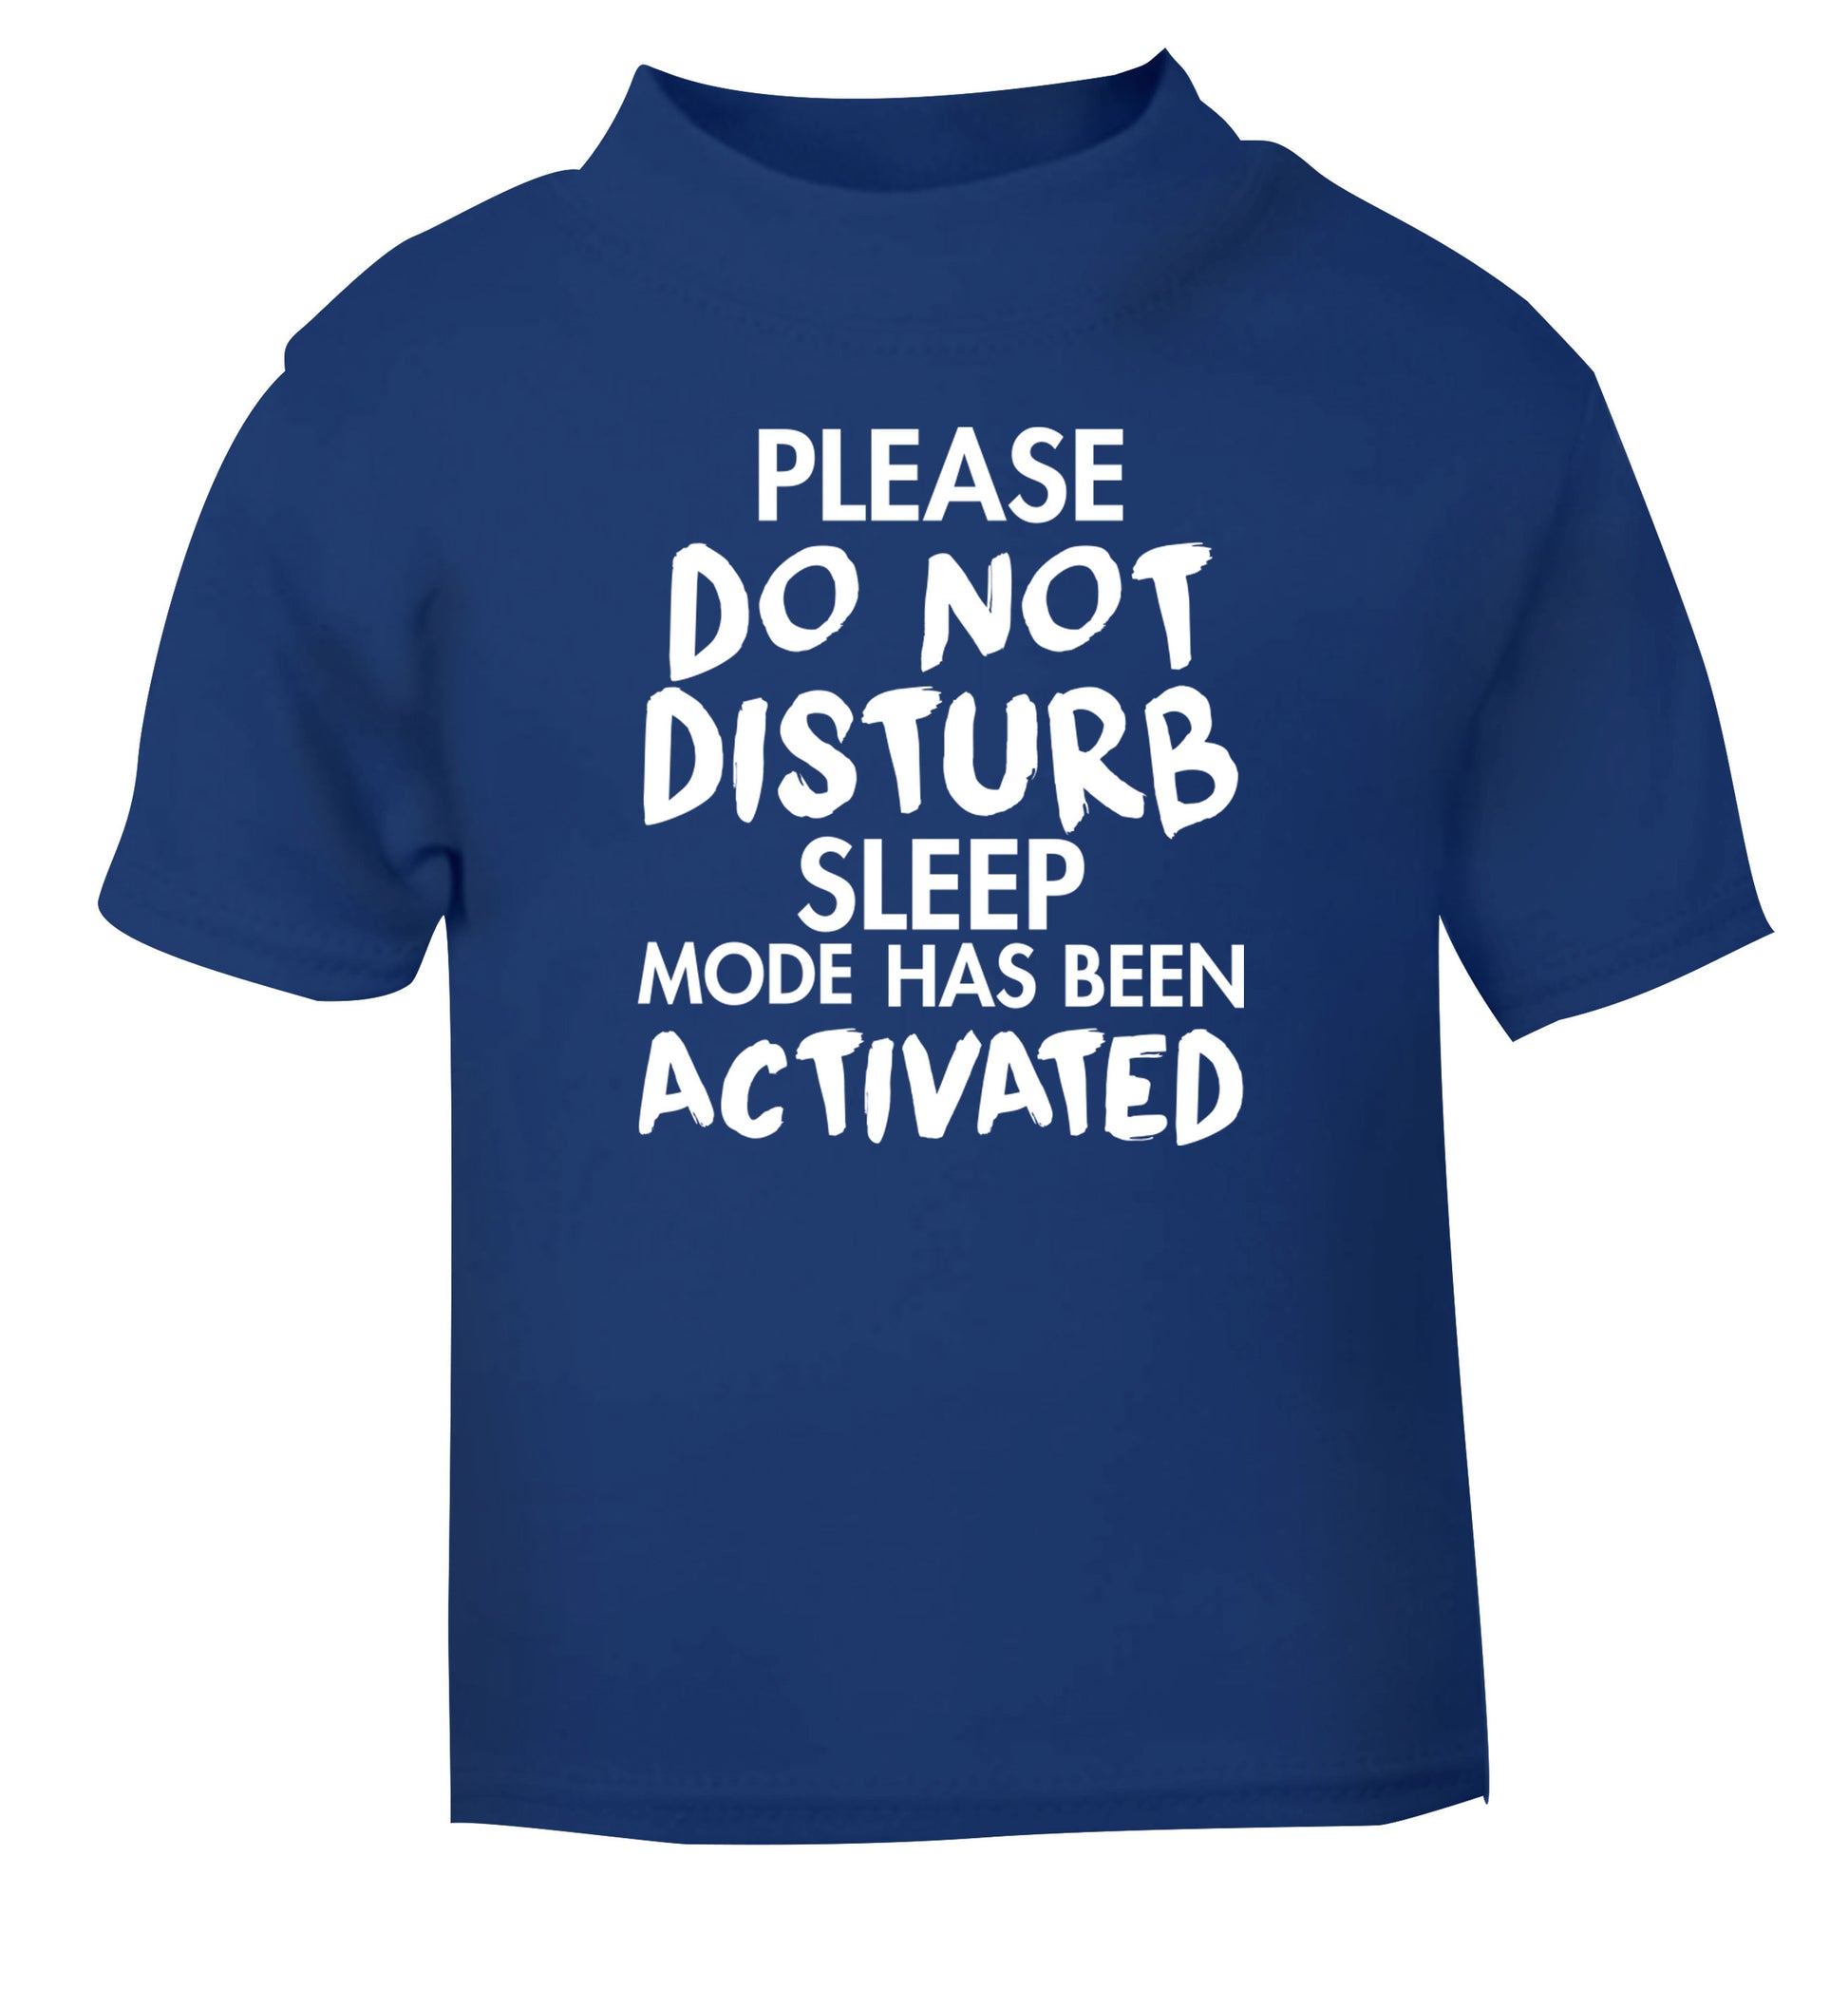 Please do not disturb sleeping mode has been activated blue Baby Toddler Tshirt 2 Years